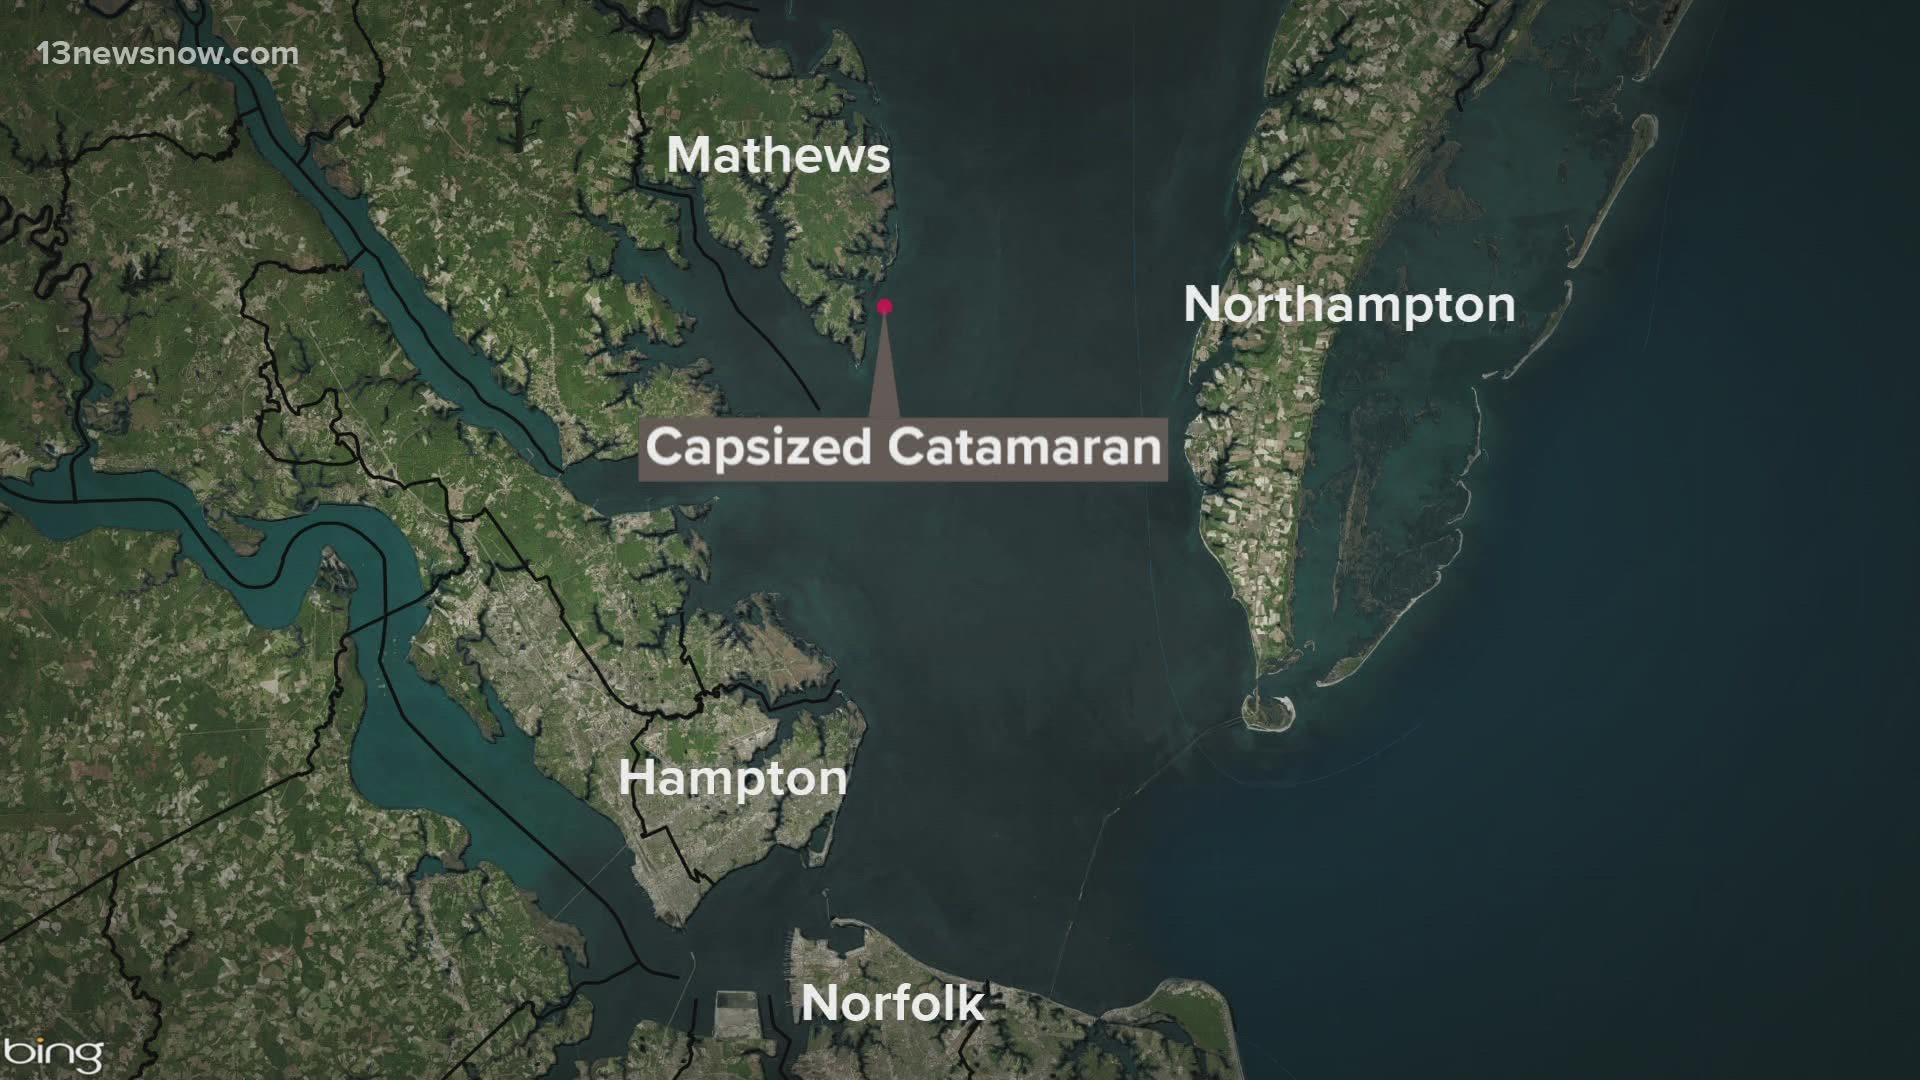 Three boaters were left stranded in the water after their boat capsized Saturday night. It happened in the Chesapeake Bay near New Point.